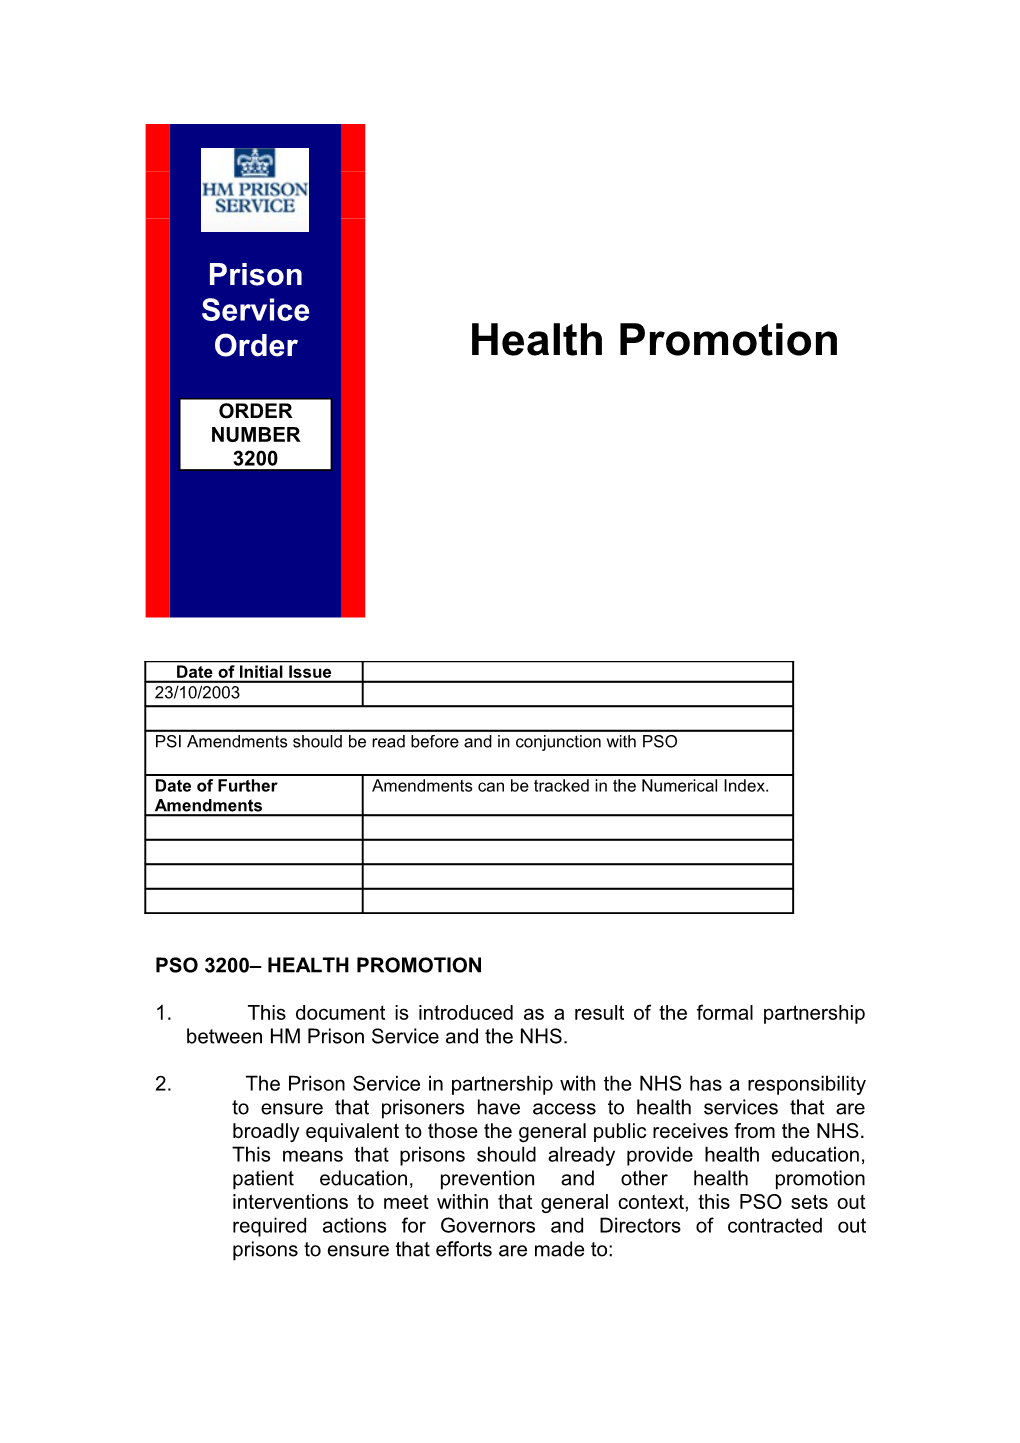 PSO 3200 - Health Promotion